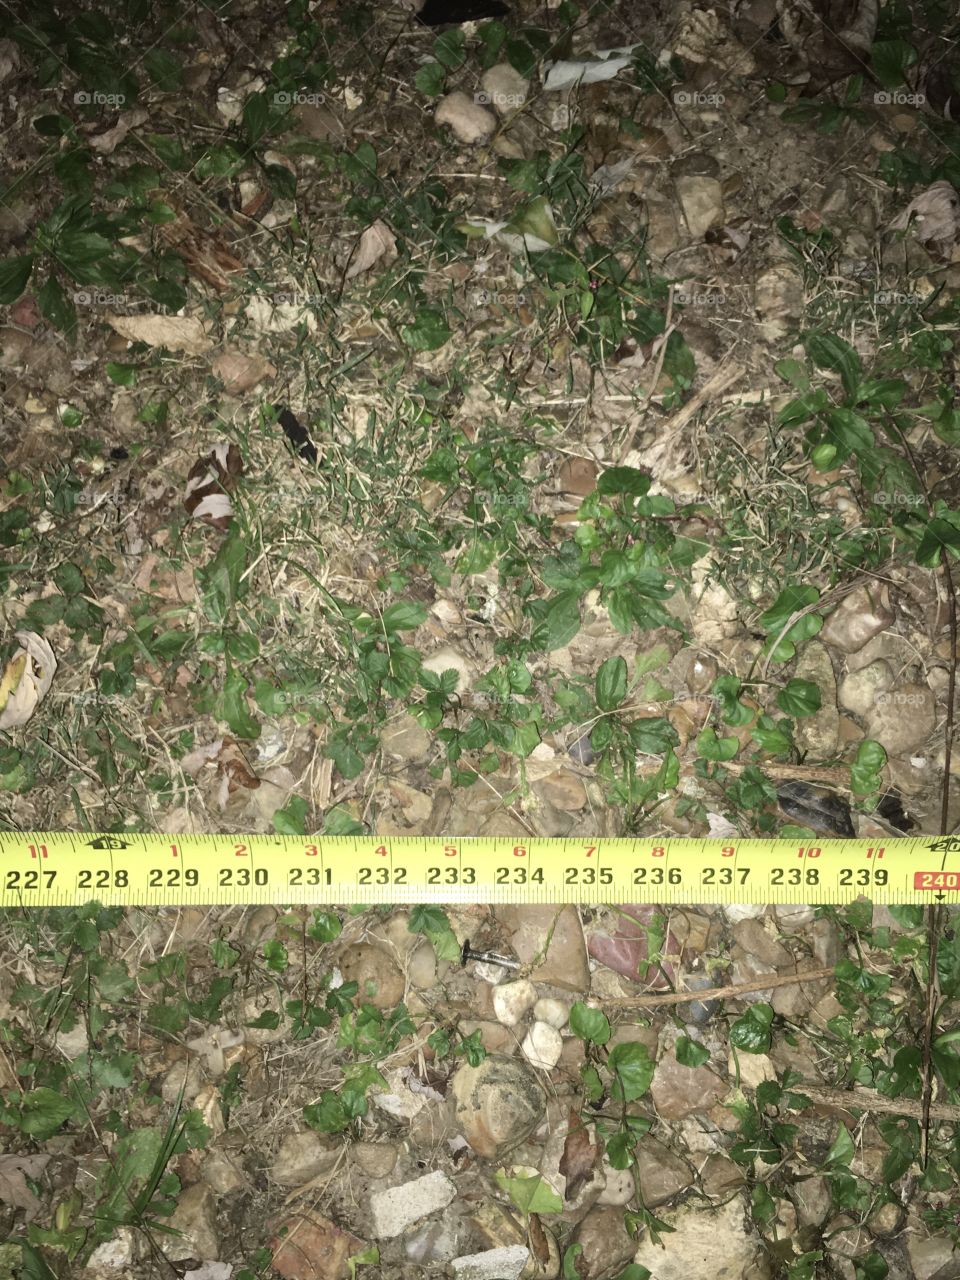 Measuring tape, grass, green, measurement, tape measure, numbers, inches, 229 inches, 227, 228, 229 230, 231, 232, 233, 234, 235, 236, 237, 238, 239, 240, “, yellow